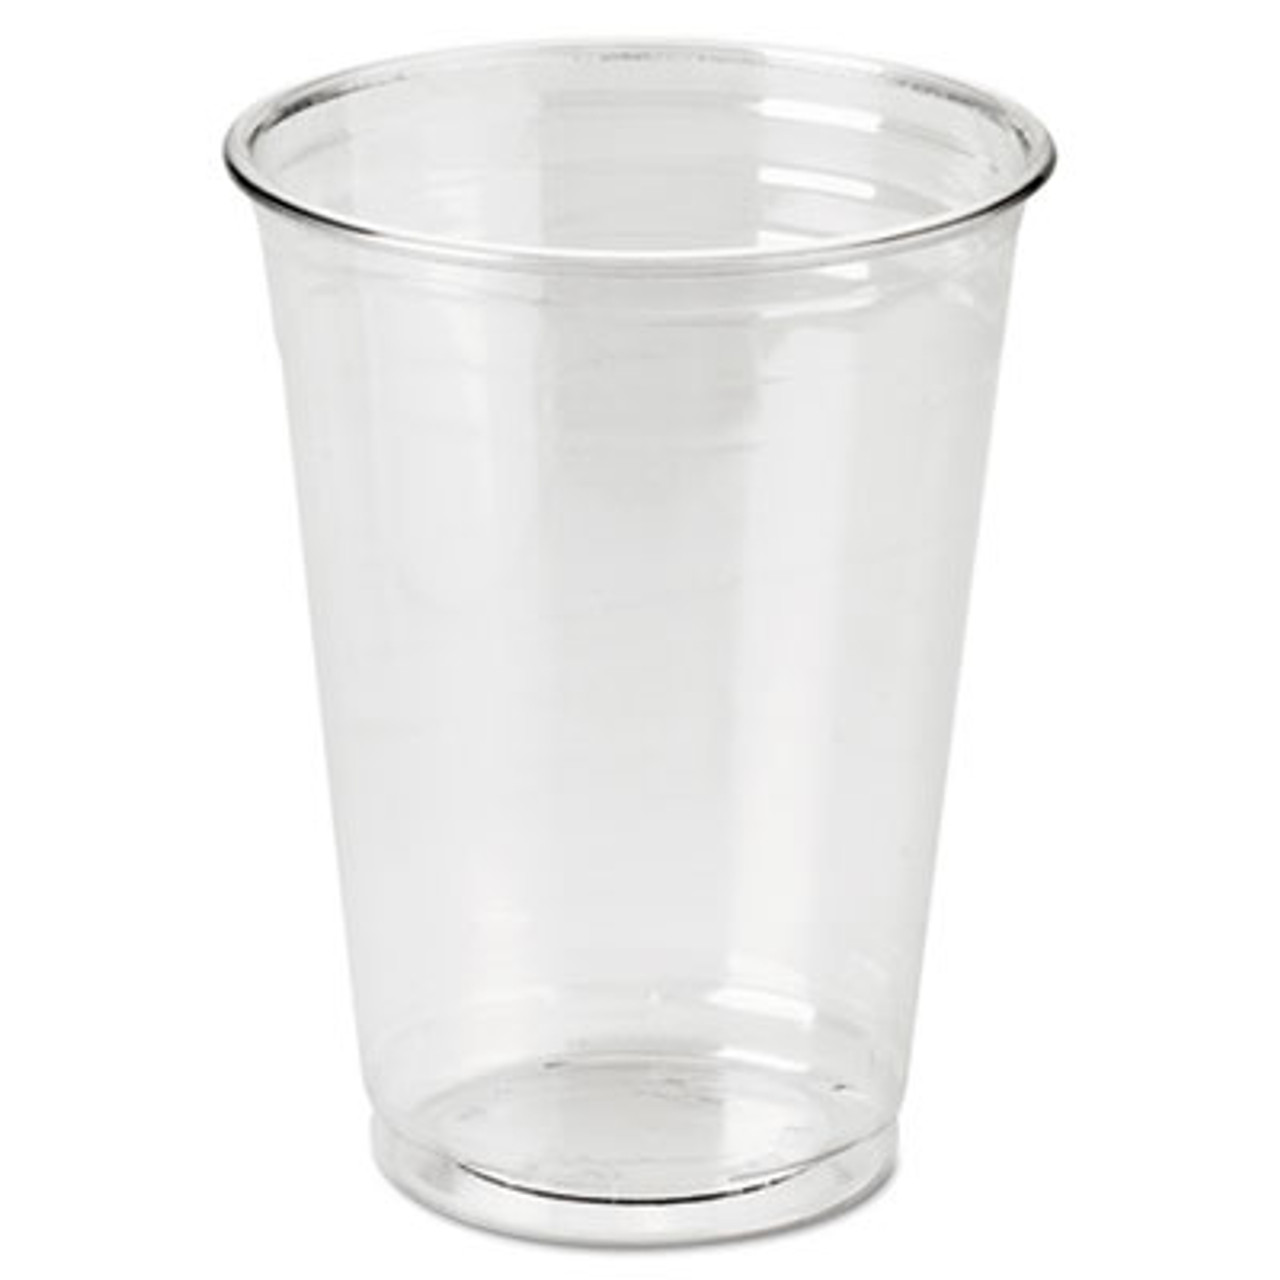 Clear Plastic PETE Cups, Cold, 10oz, WiseSize, 25/Pack, 20 Packs/Carton